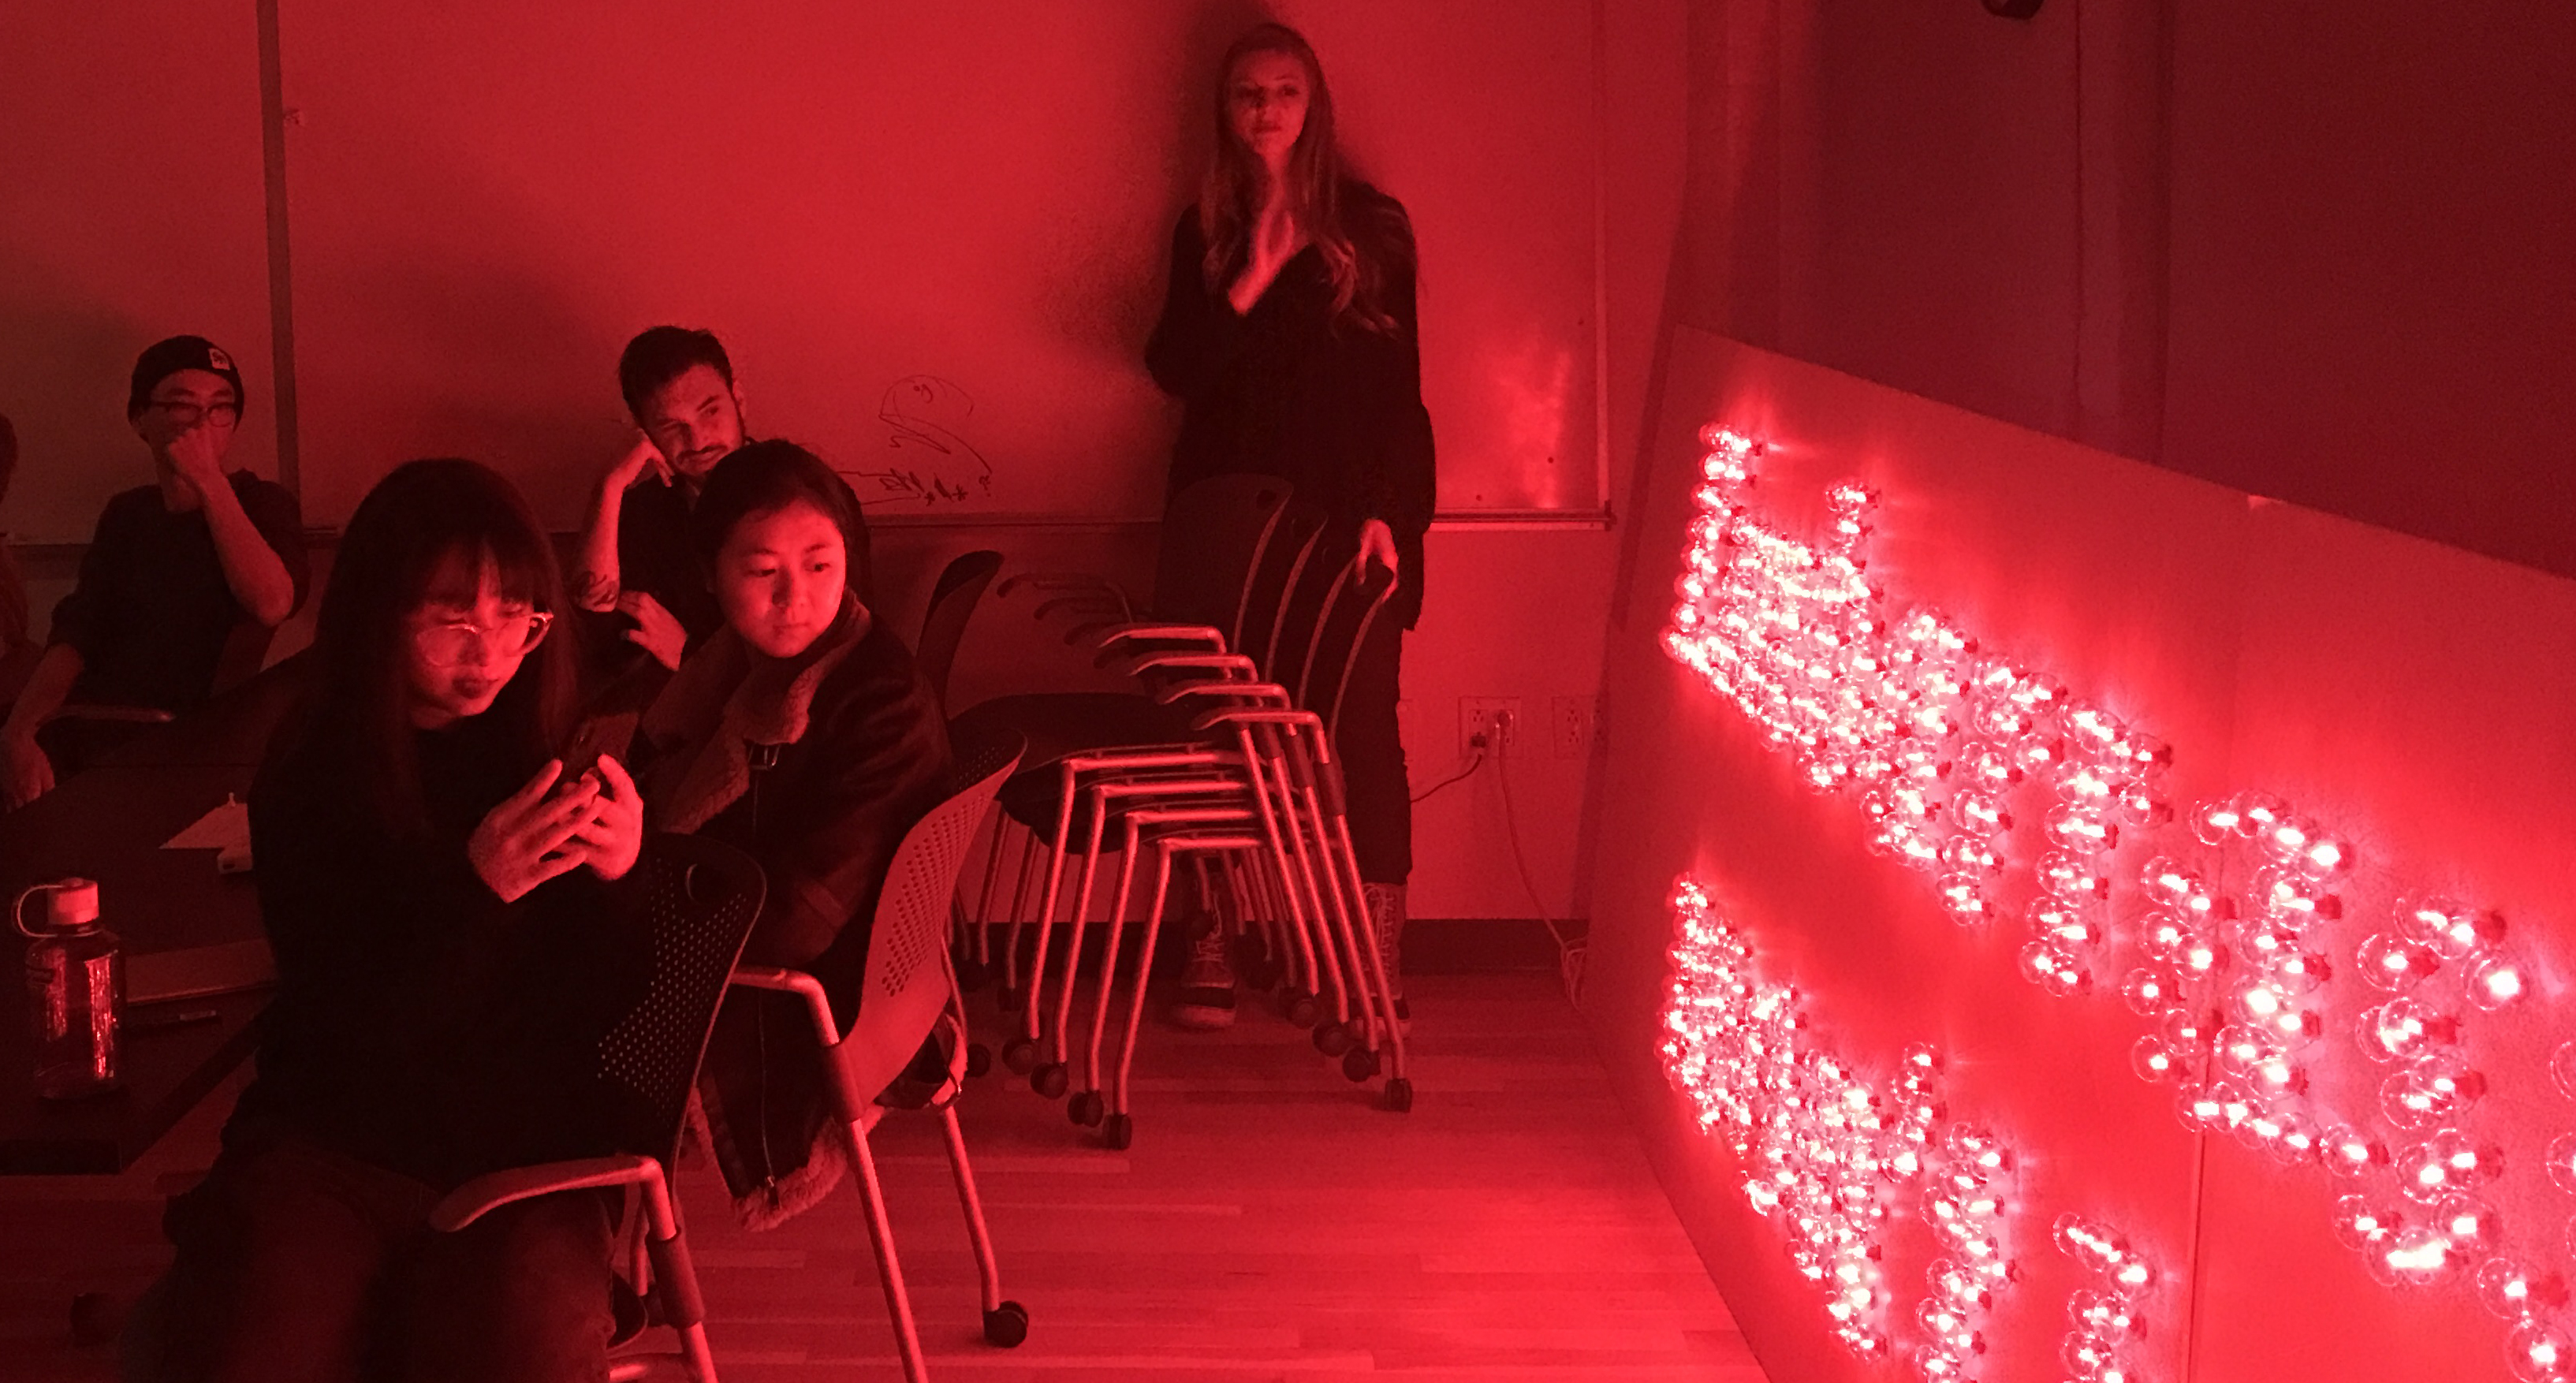 A photo of a group of students looking at a red glowing board that has some text on it made from LEDs.